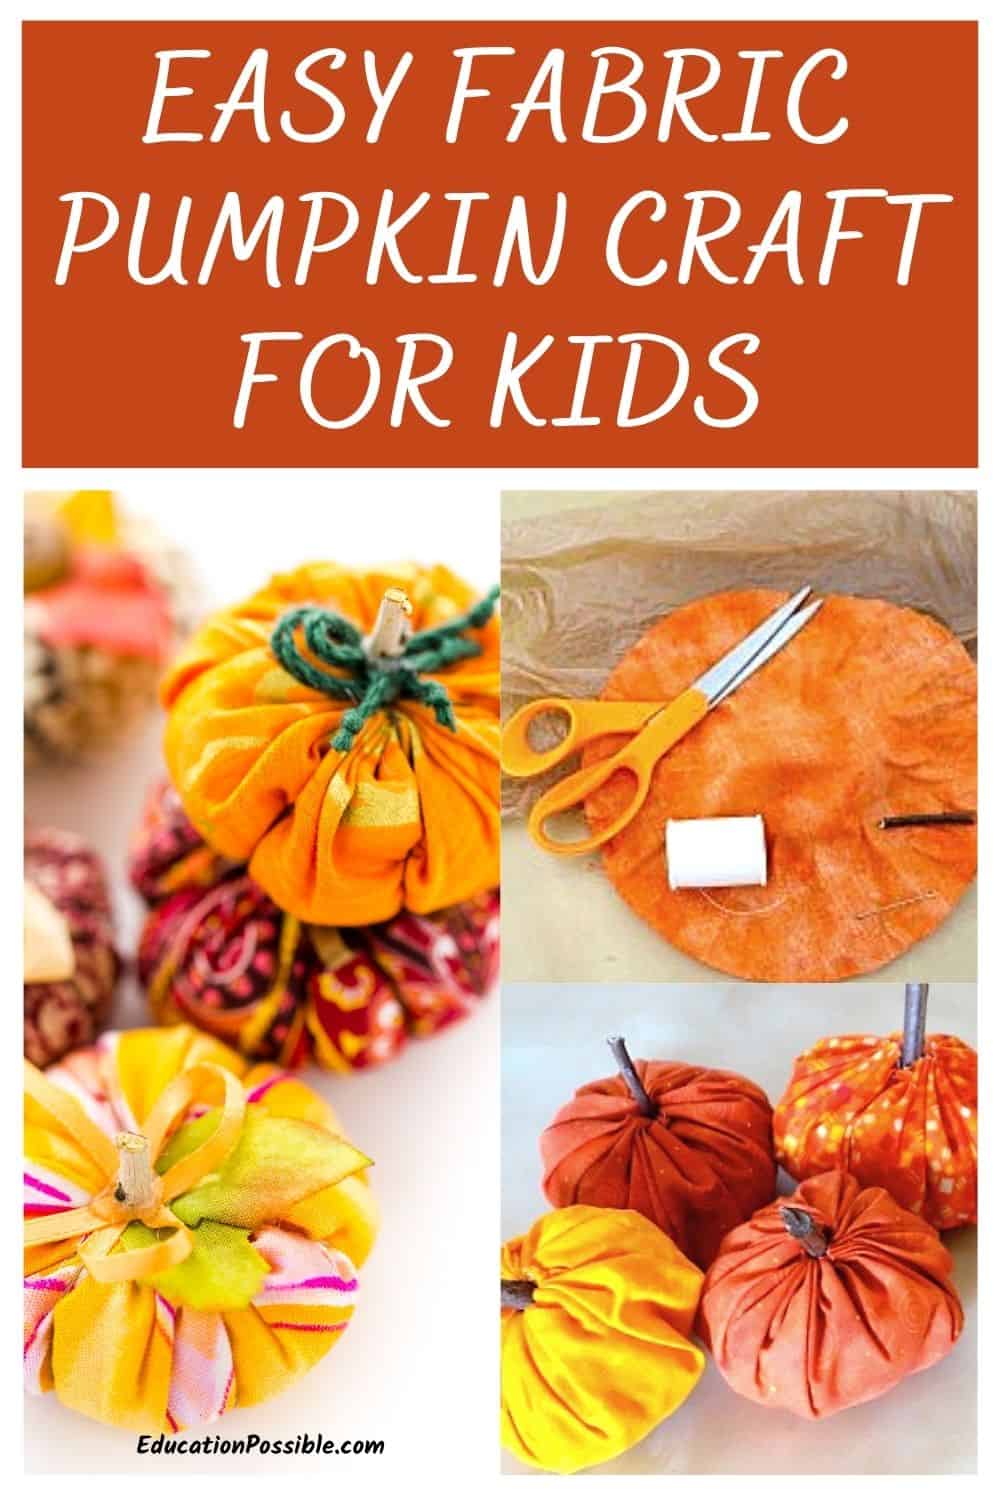 Easy Fabric Pumpkin Craft for Kids to Make